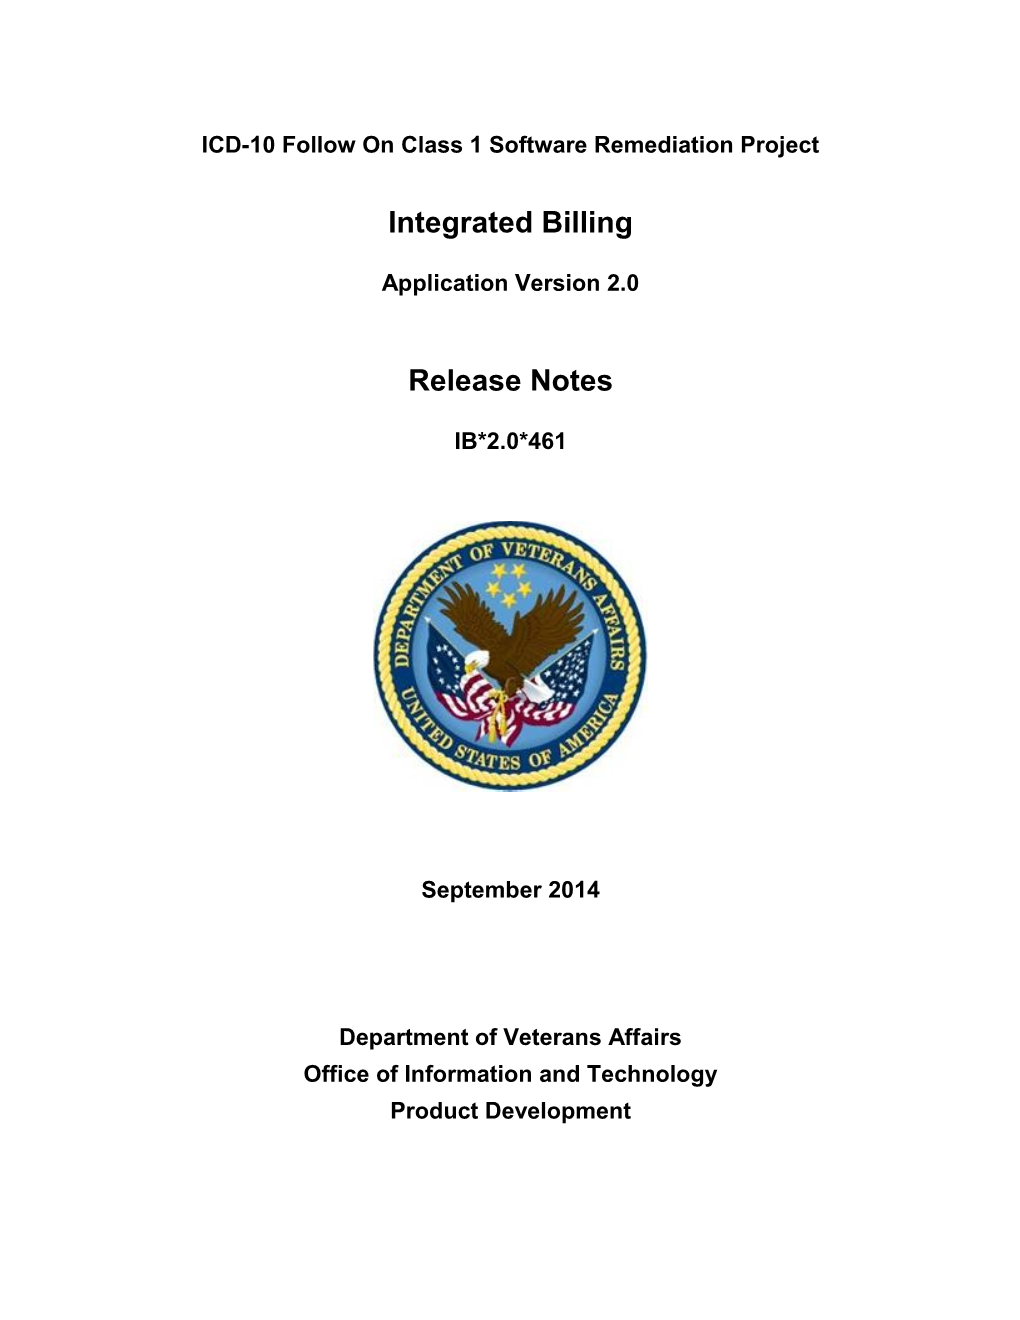 Integrated Billing (IB) Release Notes (IB*2*461)